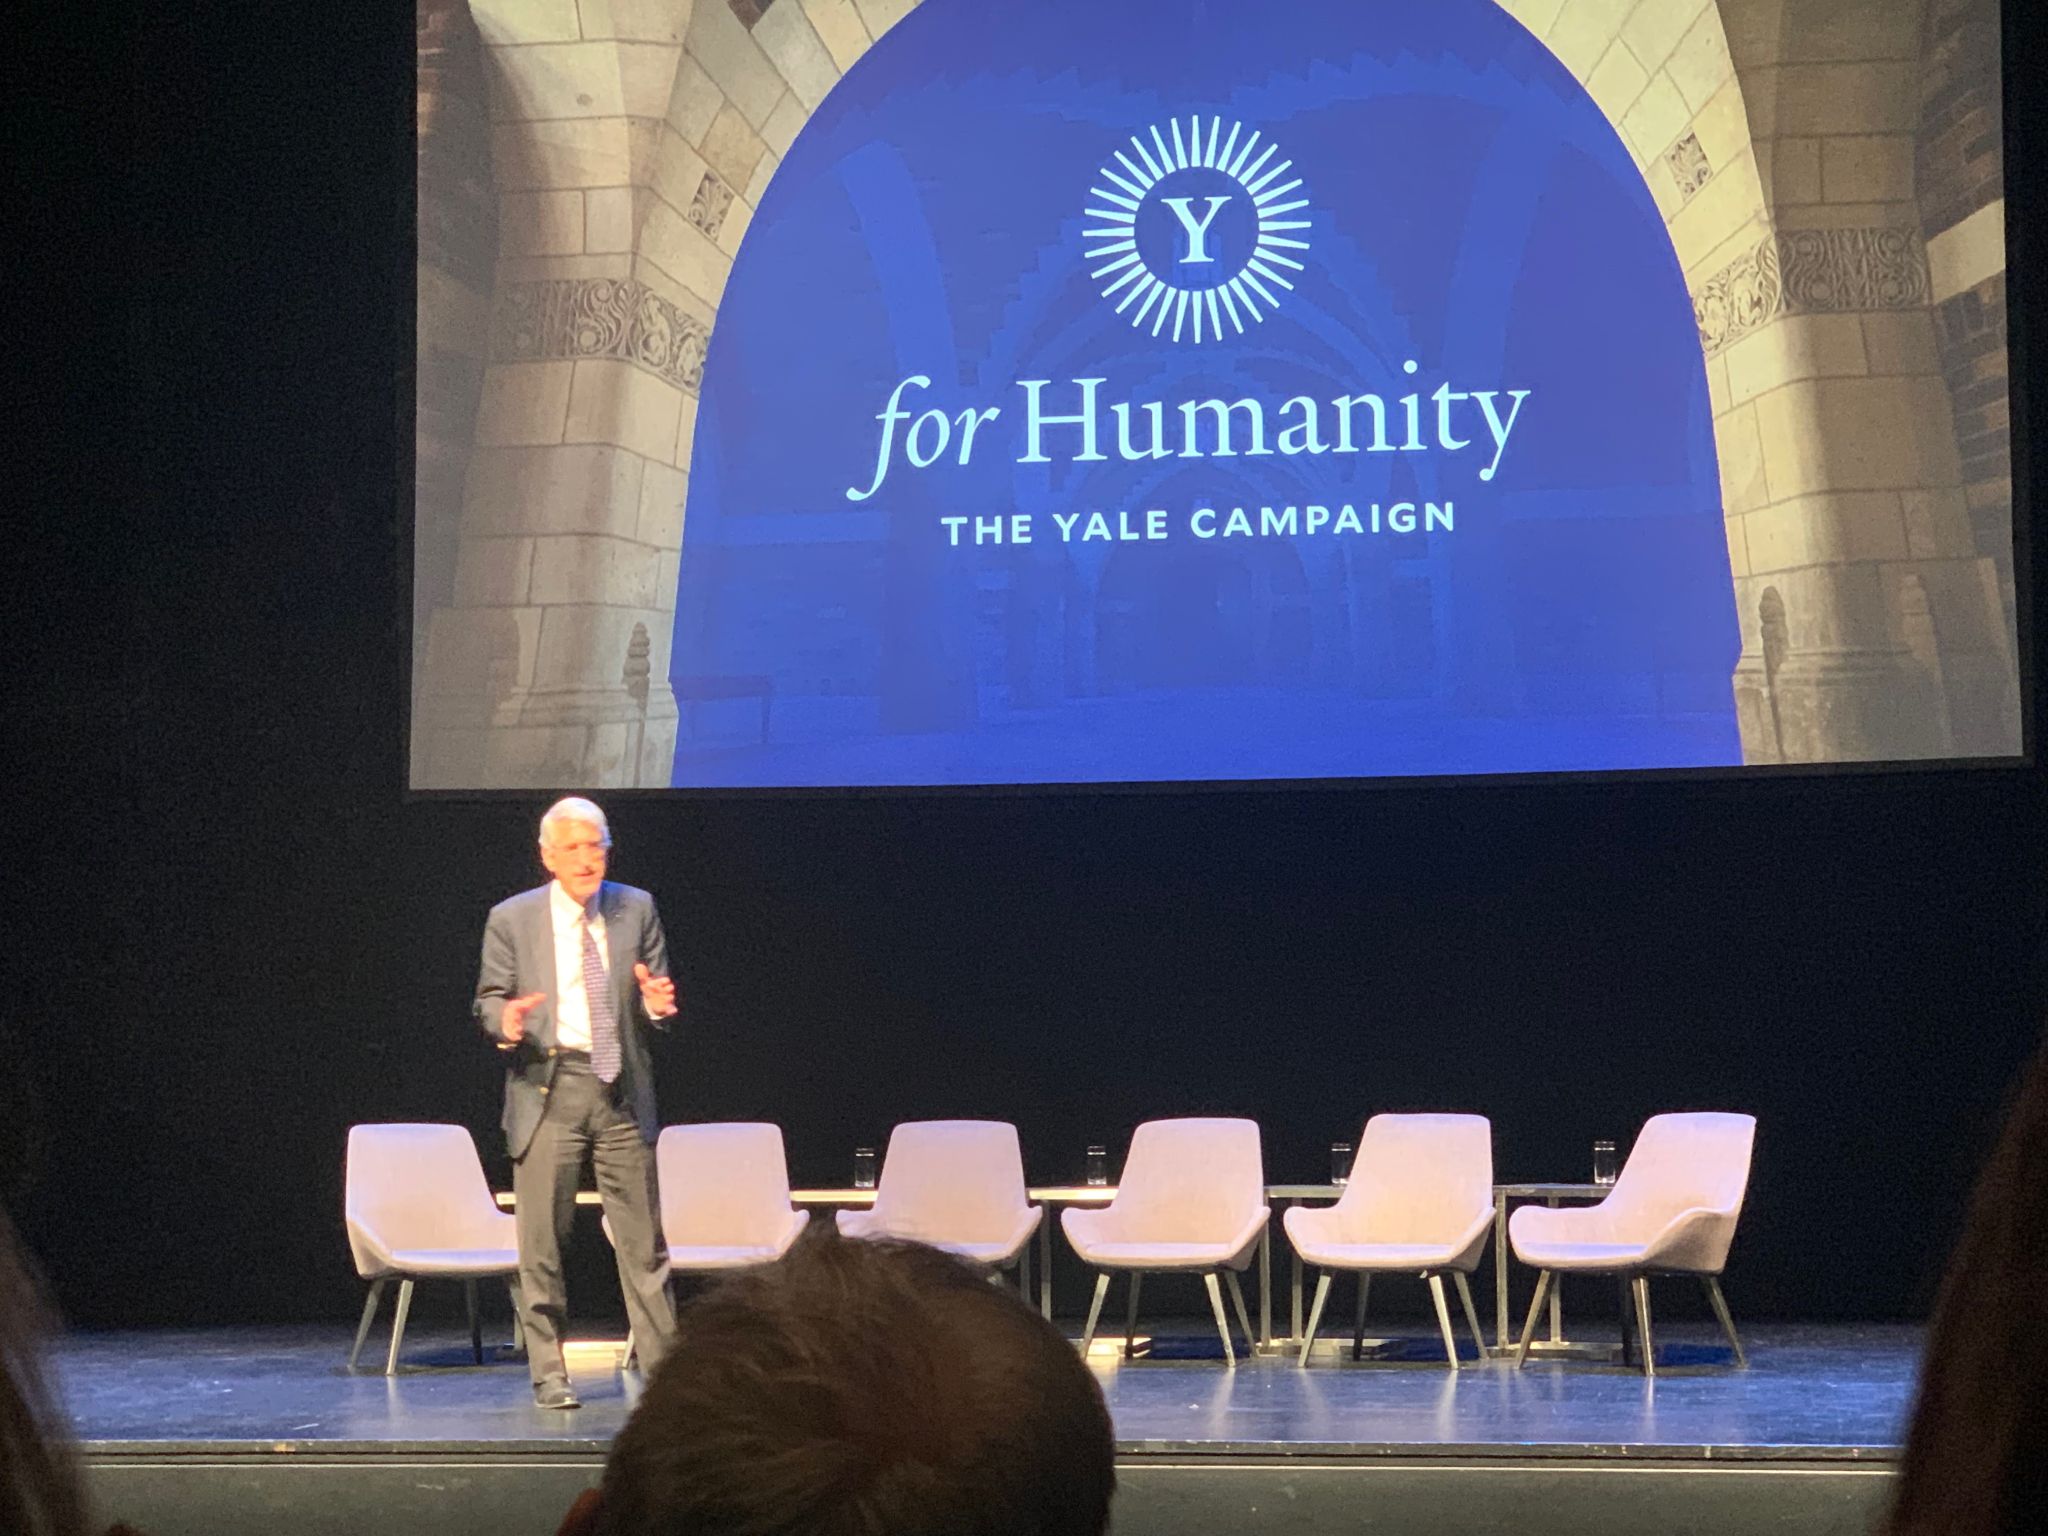 Peter Salovey speaking on stage in front of a Yale for Humanity banner